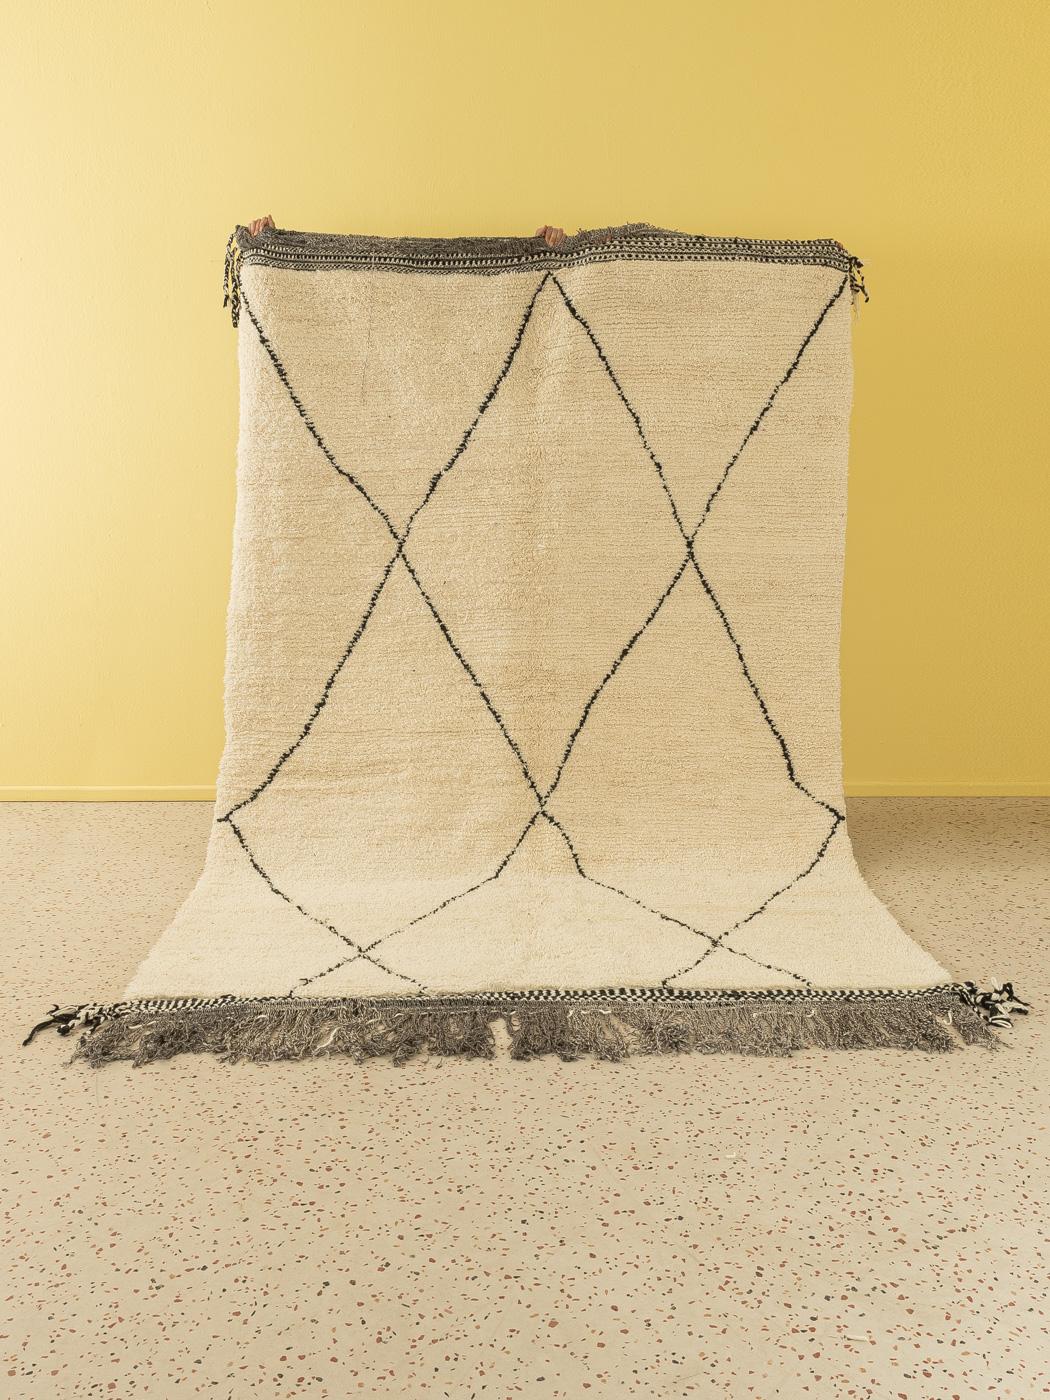 Traditional Beni is a contemporary 100% wool rug – thick and soft, comfortable underfoot. Our Berber rugs are handwoven and handknotted by Amazigh women in the Atlas Mountains. These communities have been crafting rugs for thousands of years. One